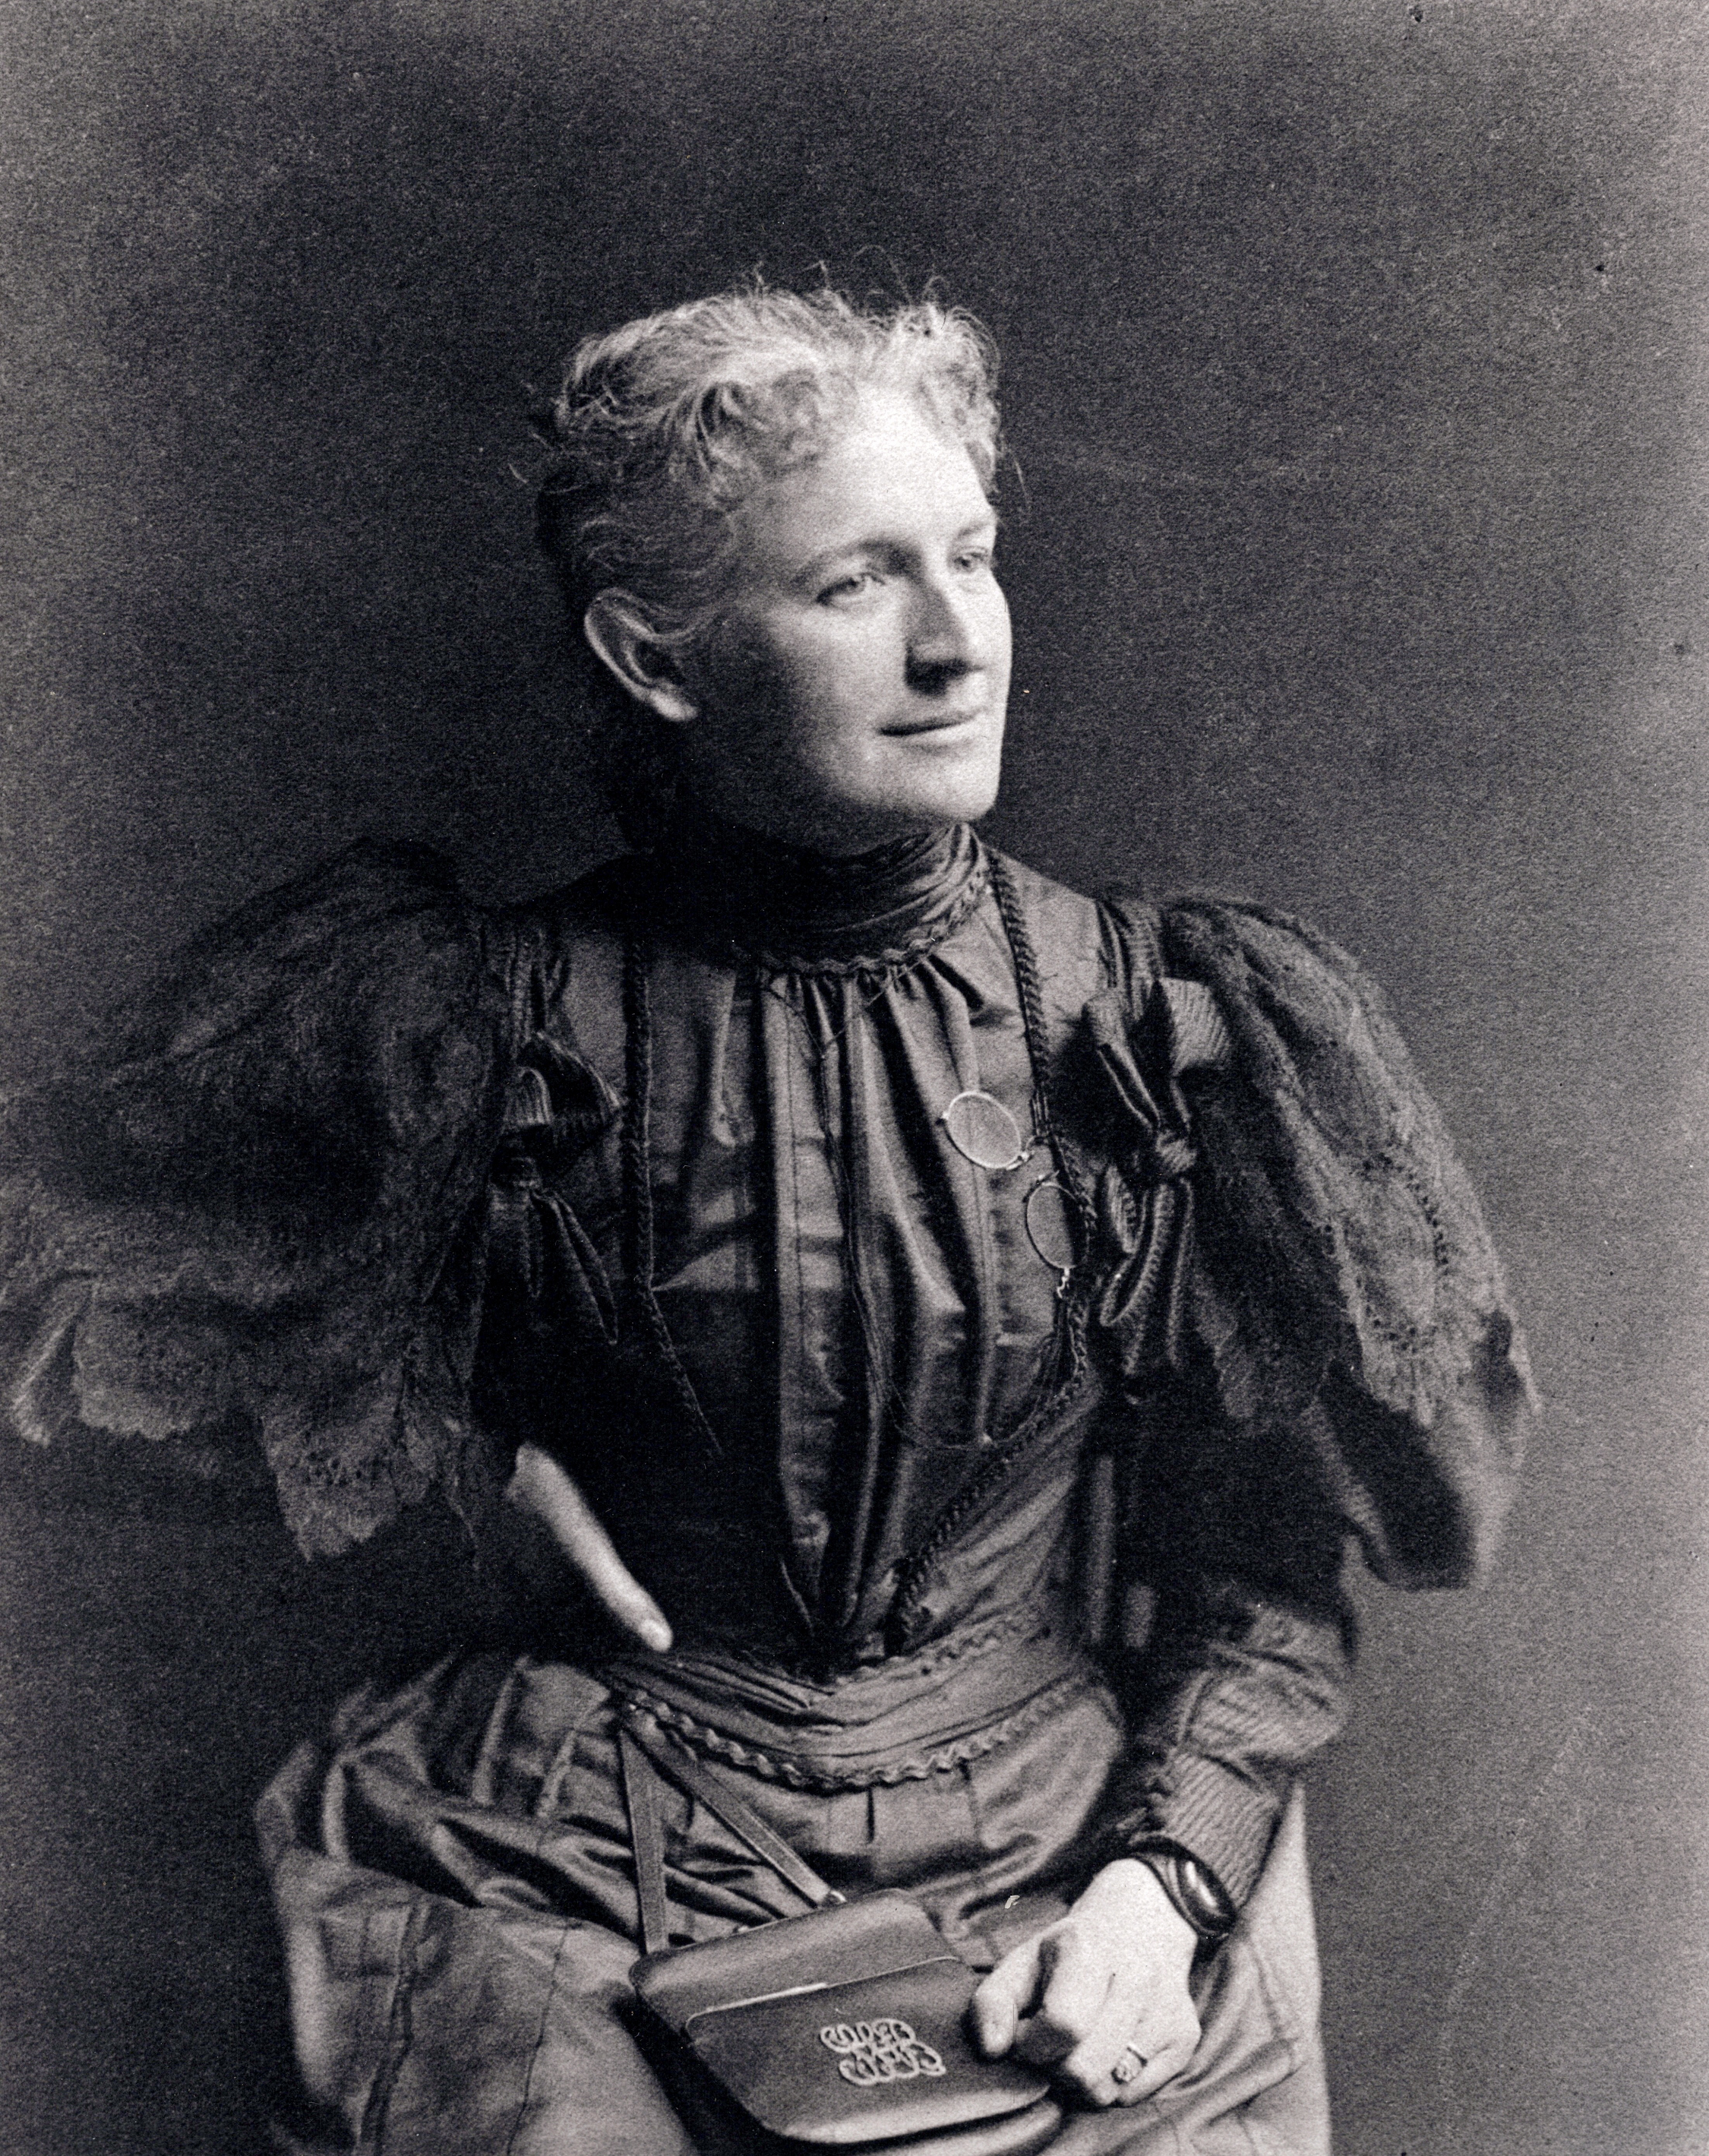 A black-and-white portrait photograph of a light-skinned woman from the late 1800s.She wears a dark, ruffled dress that has a high collar and puffy sleeves. Her light hair is pulled back and she looks to the right, slightly smiling, while one hand rests on her hip and the other in her lap, atop a small leather bag.